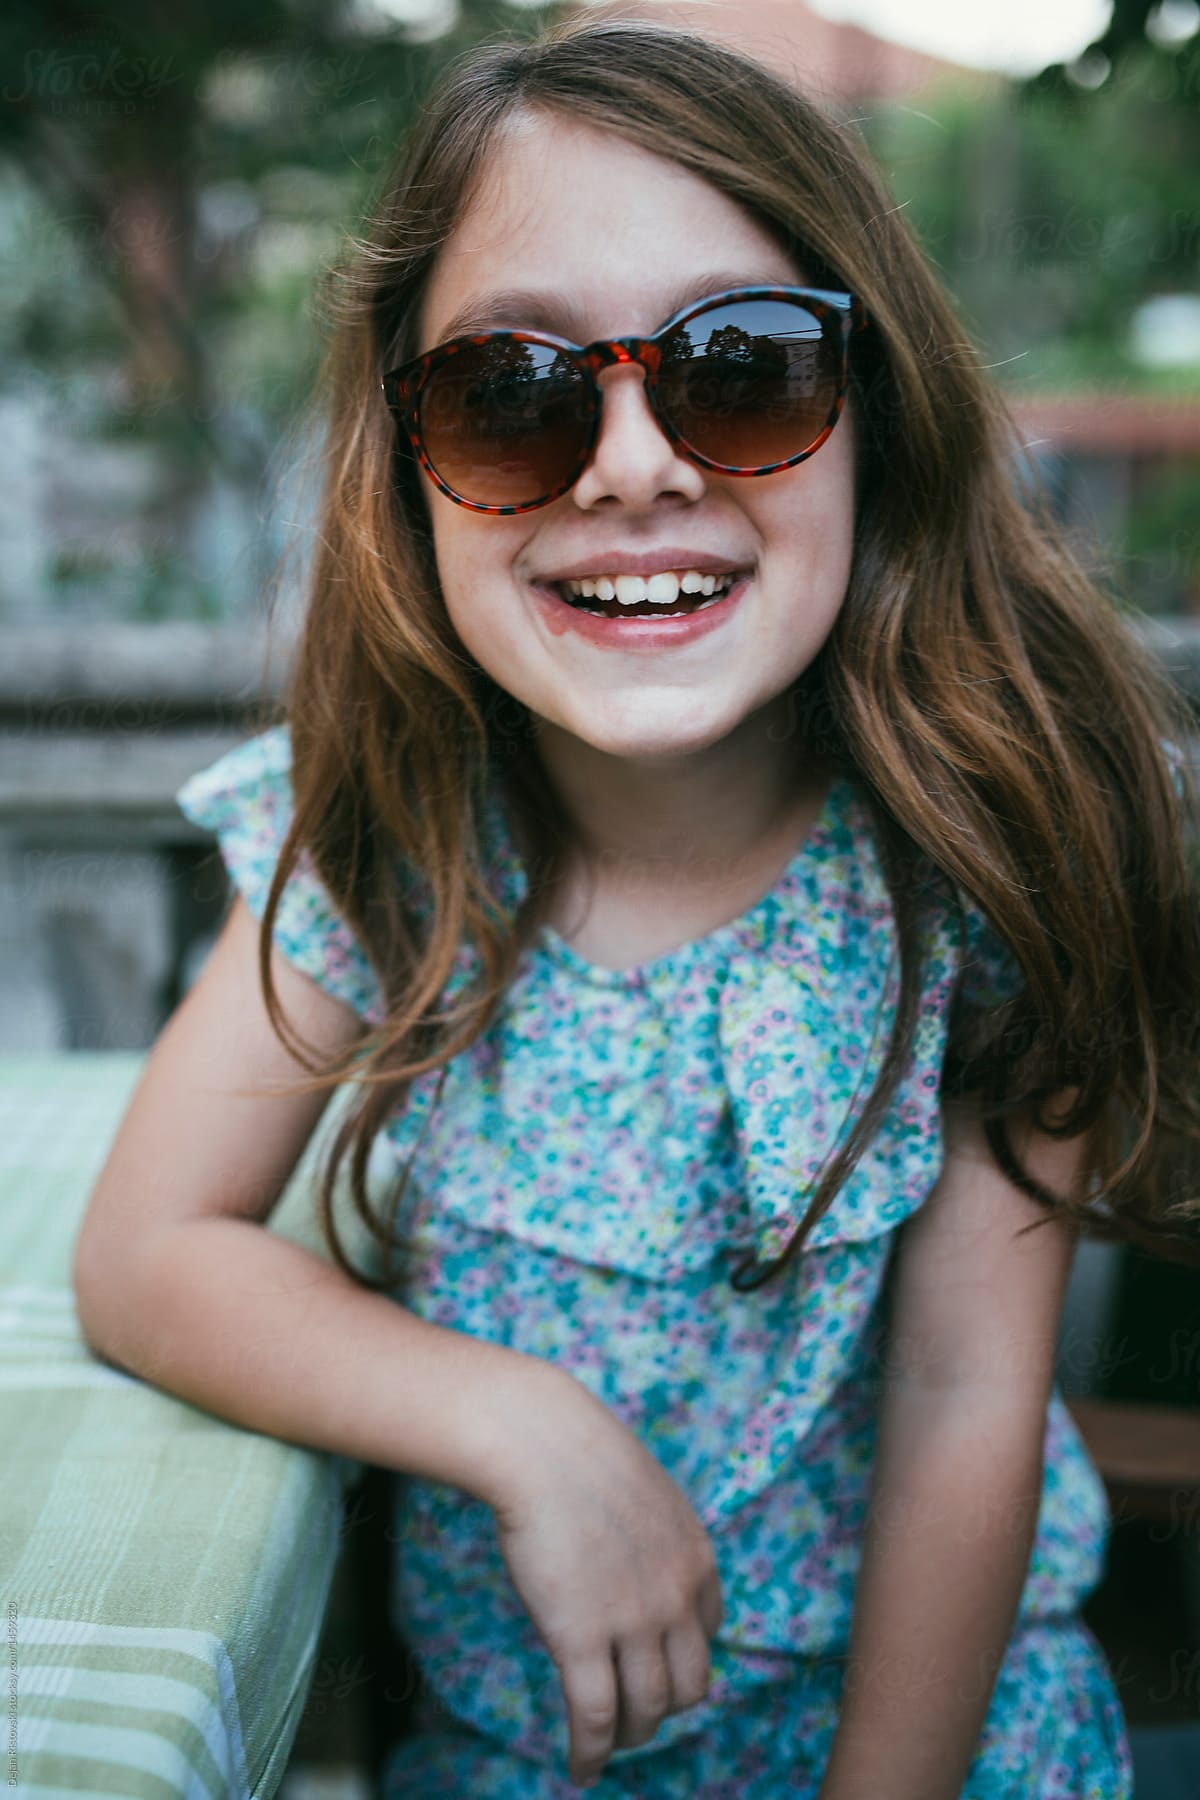 Girl With Sunglasses Smiling And Looking At The Camera By Dejan Ristovski 